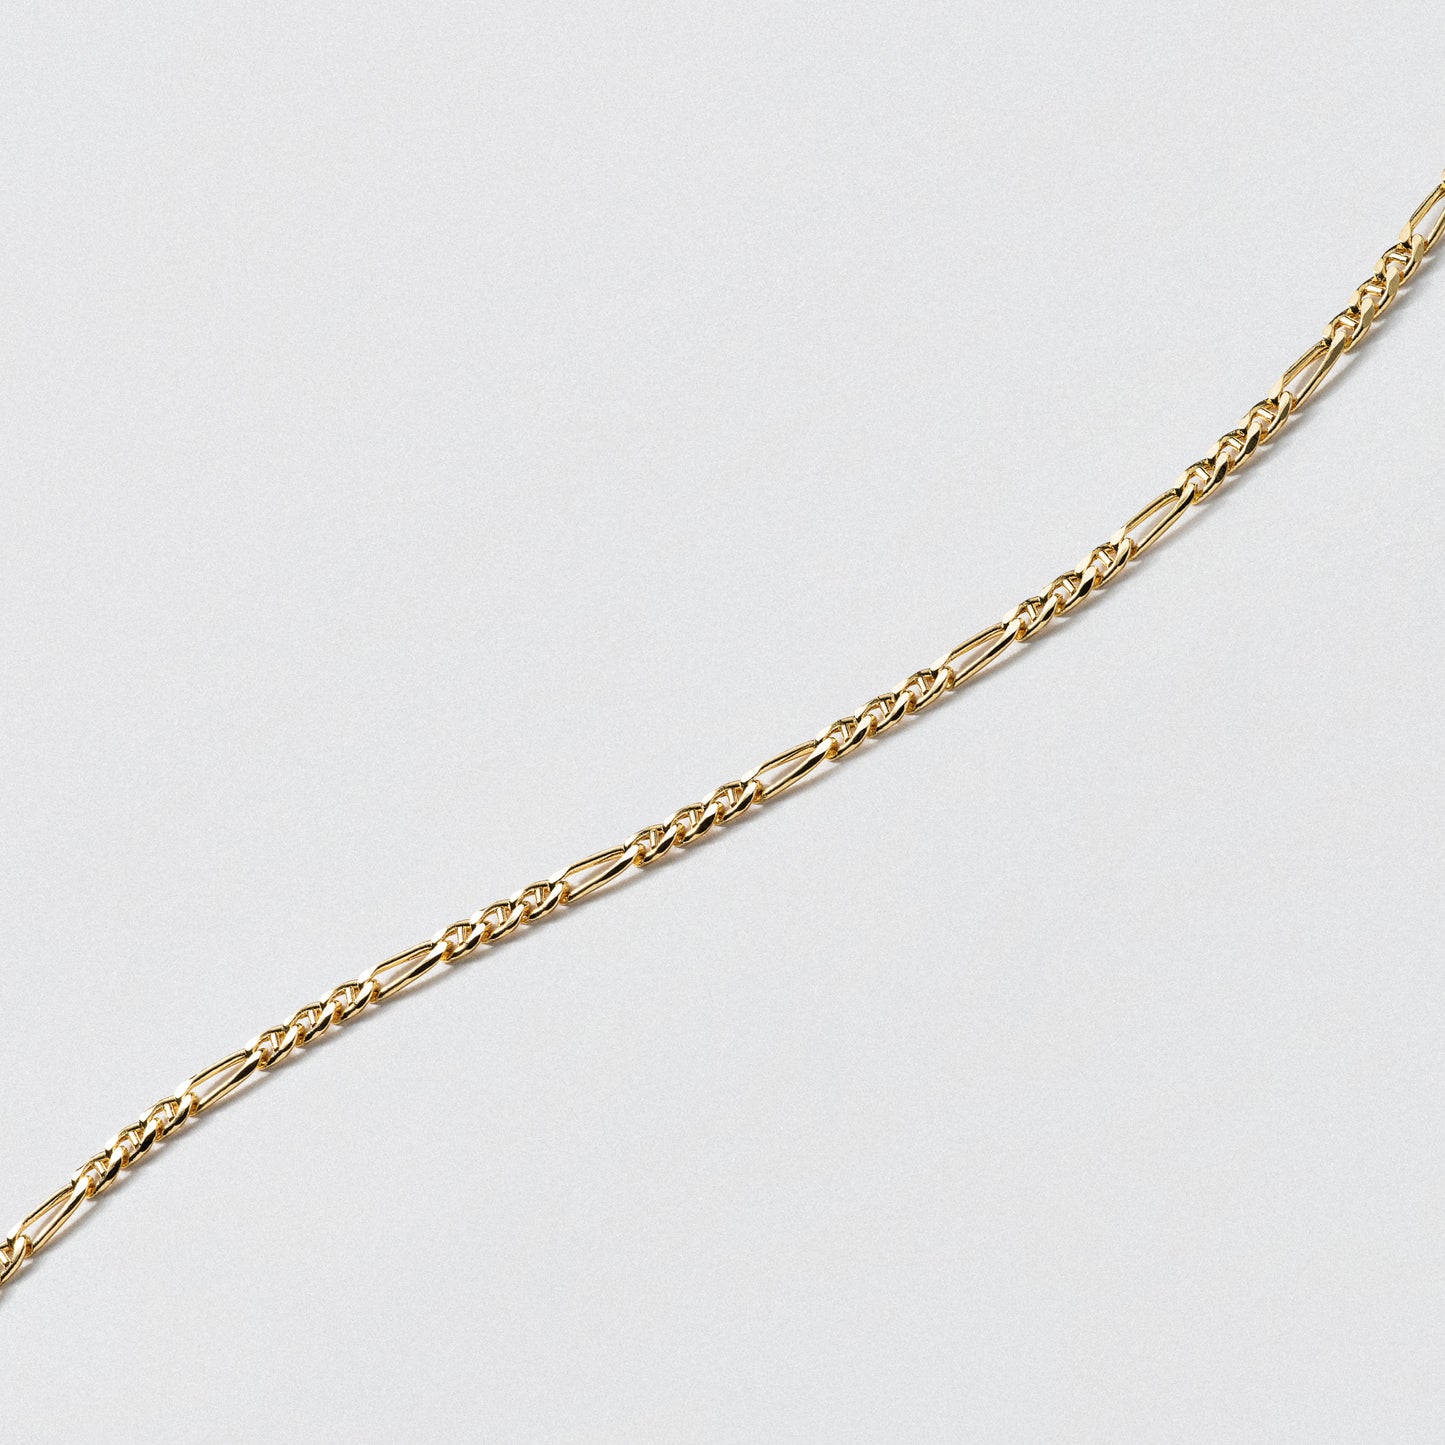 Yellow Gold Anchor Bracelet - Polished 3.95mm